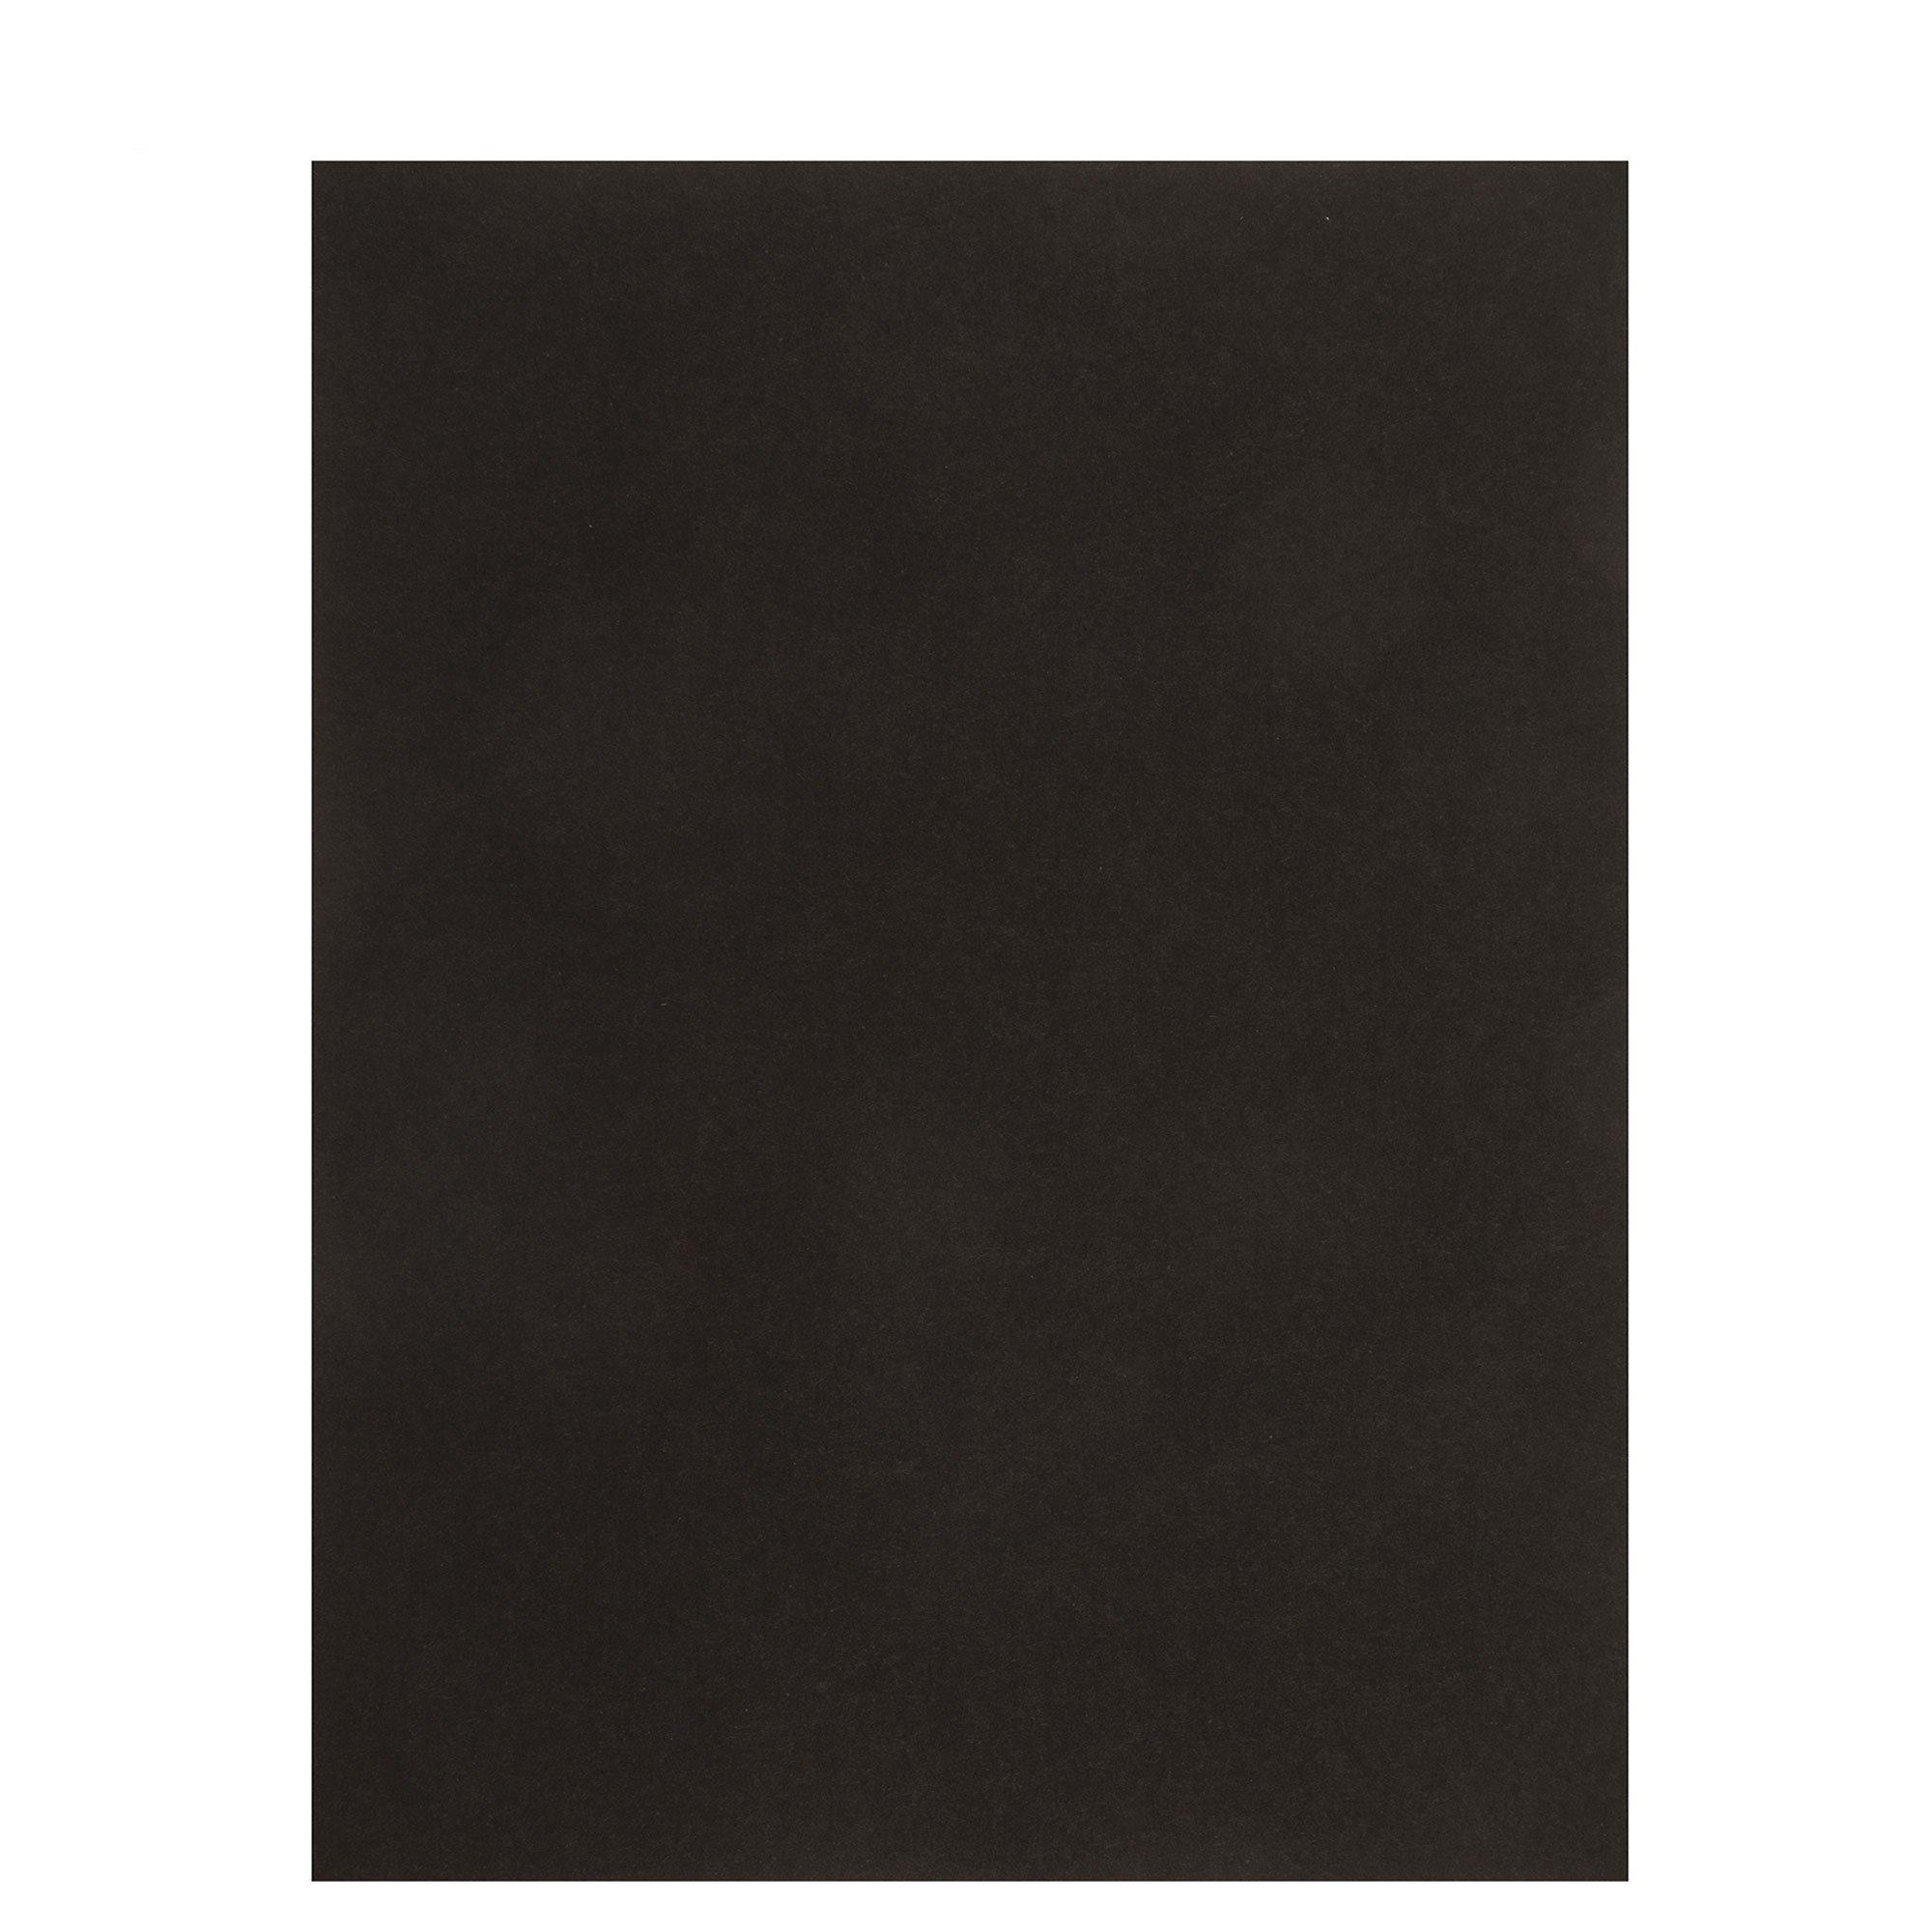 Smooth Cardstock Paper - 8 1/2 x 11, Hobby Lobby